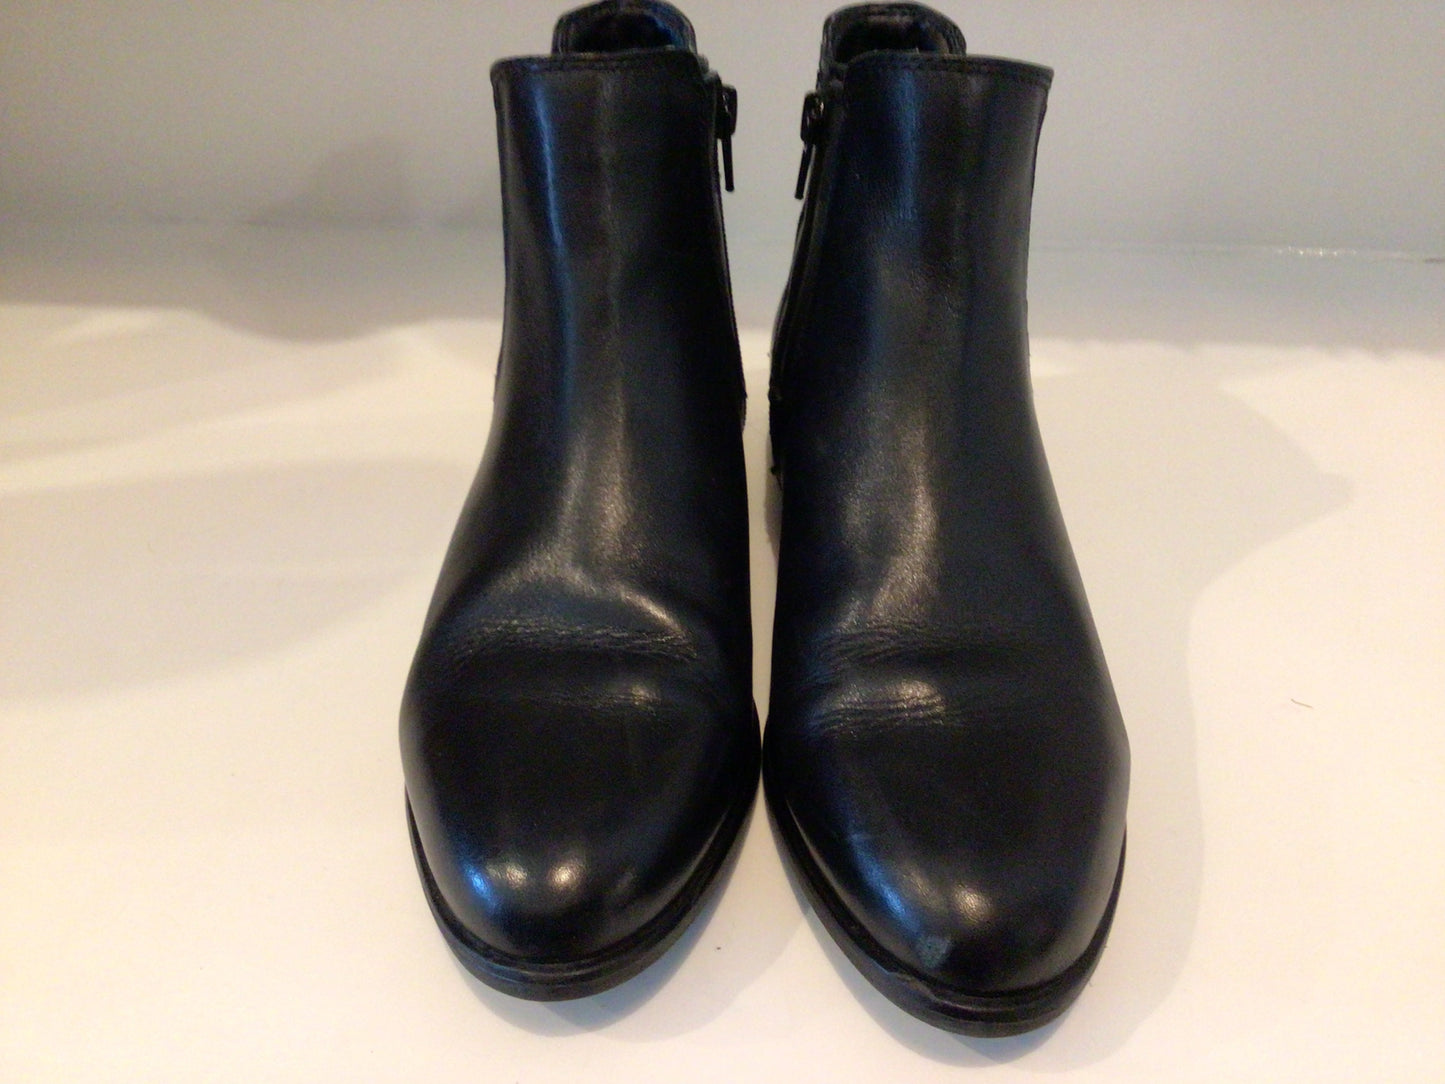 Consignment - 8880-2 Steve Madden black ankle boots sz 37